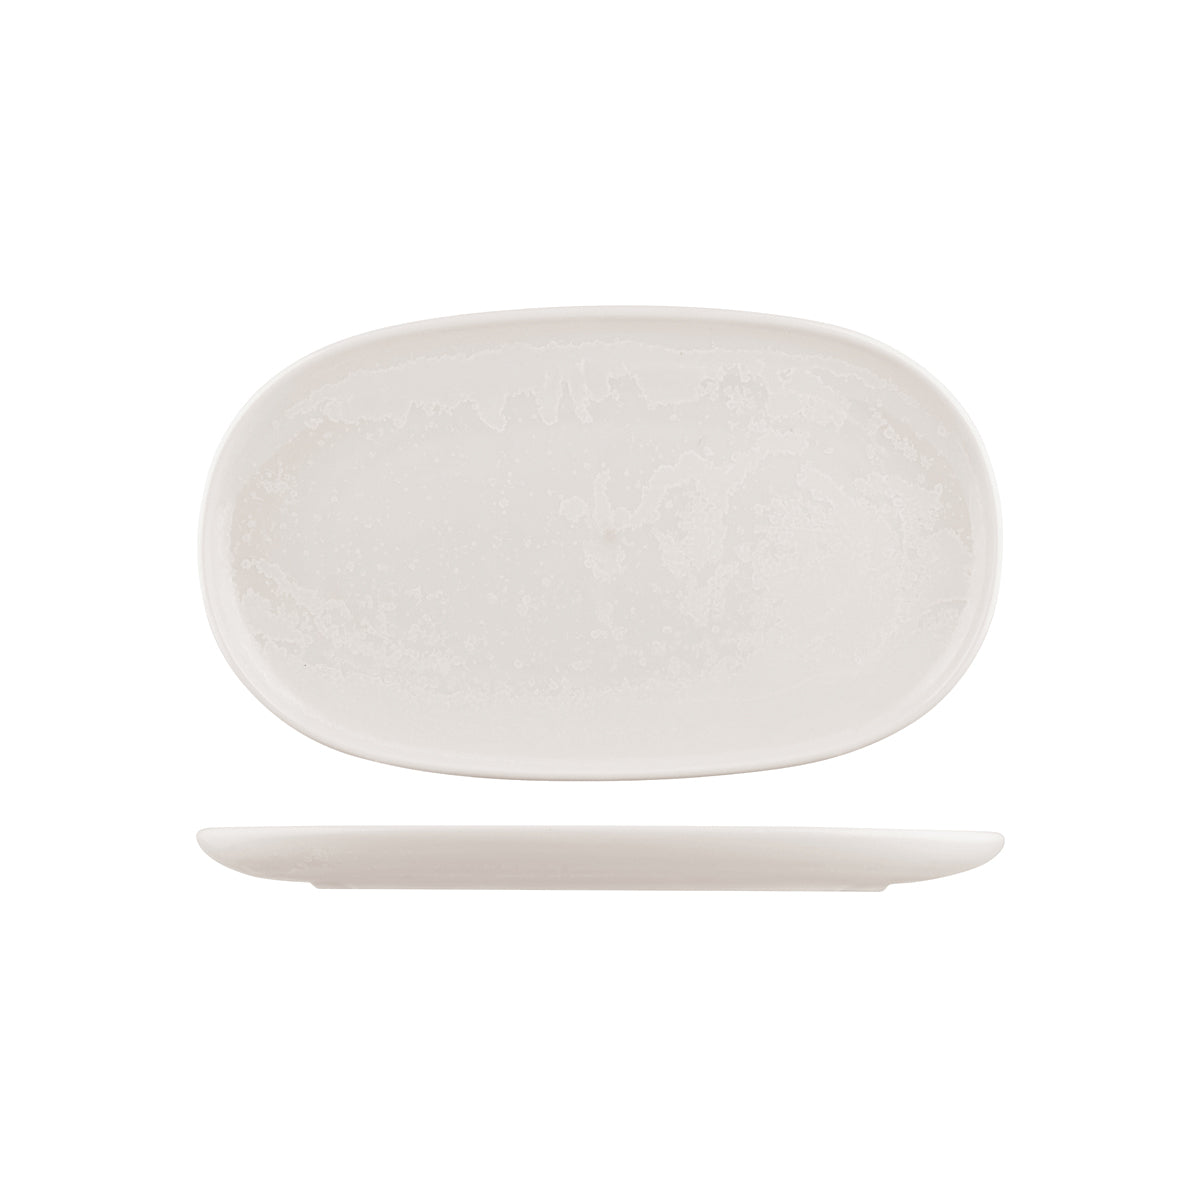 Oval plate - 355mm, Snow, Moda Porcelain from Moda Porcelain. made out of Porcelain and sold in boxes of 6. Hospitality quality at wholesale price with The Flying Fork! 